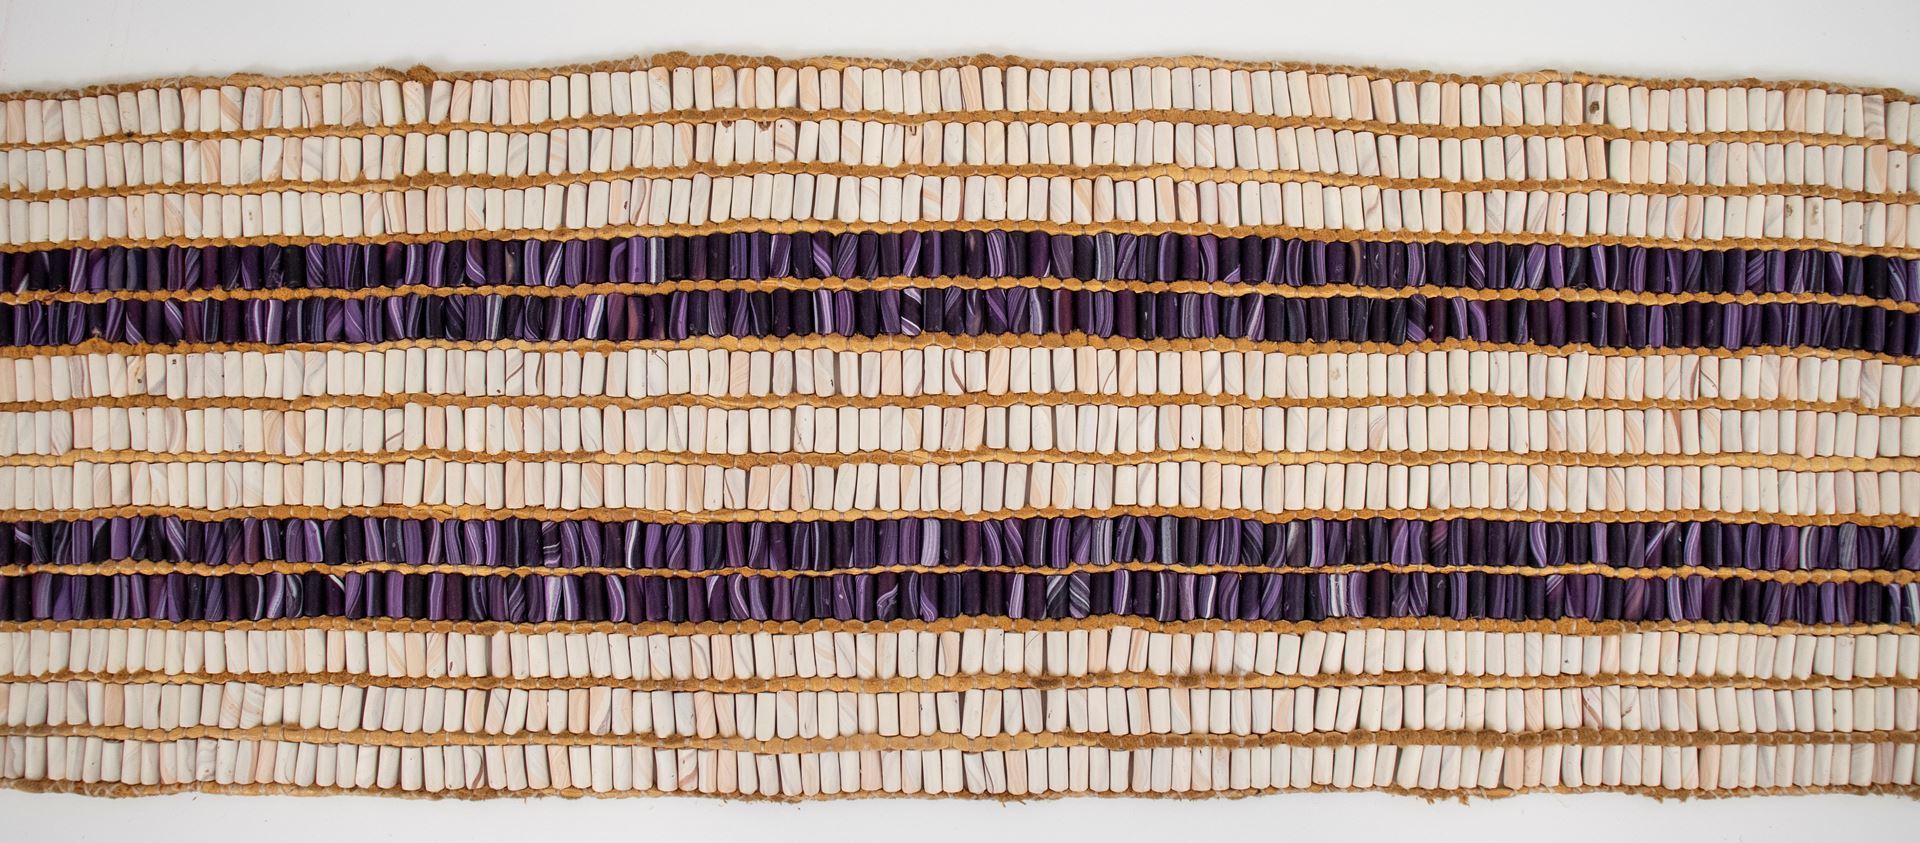 Haudenosaunee wampum belt with white and purple beads signifying peace and the people travelling on rivers